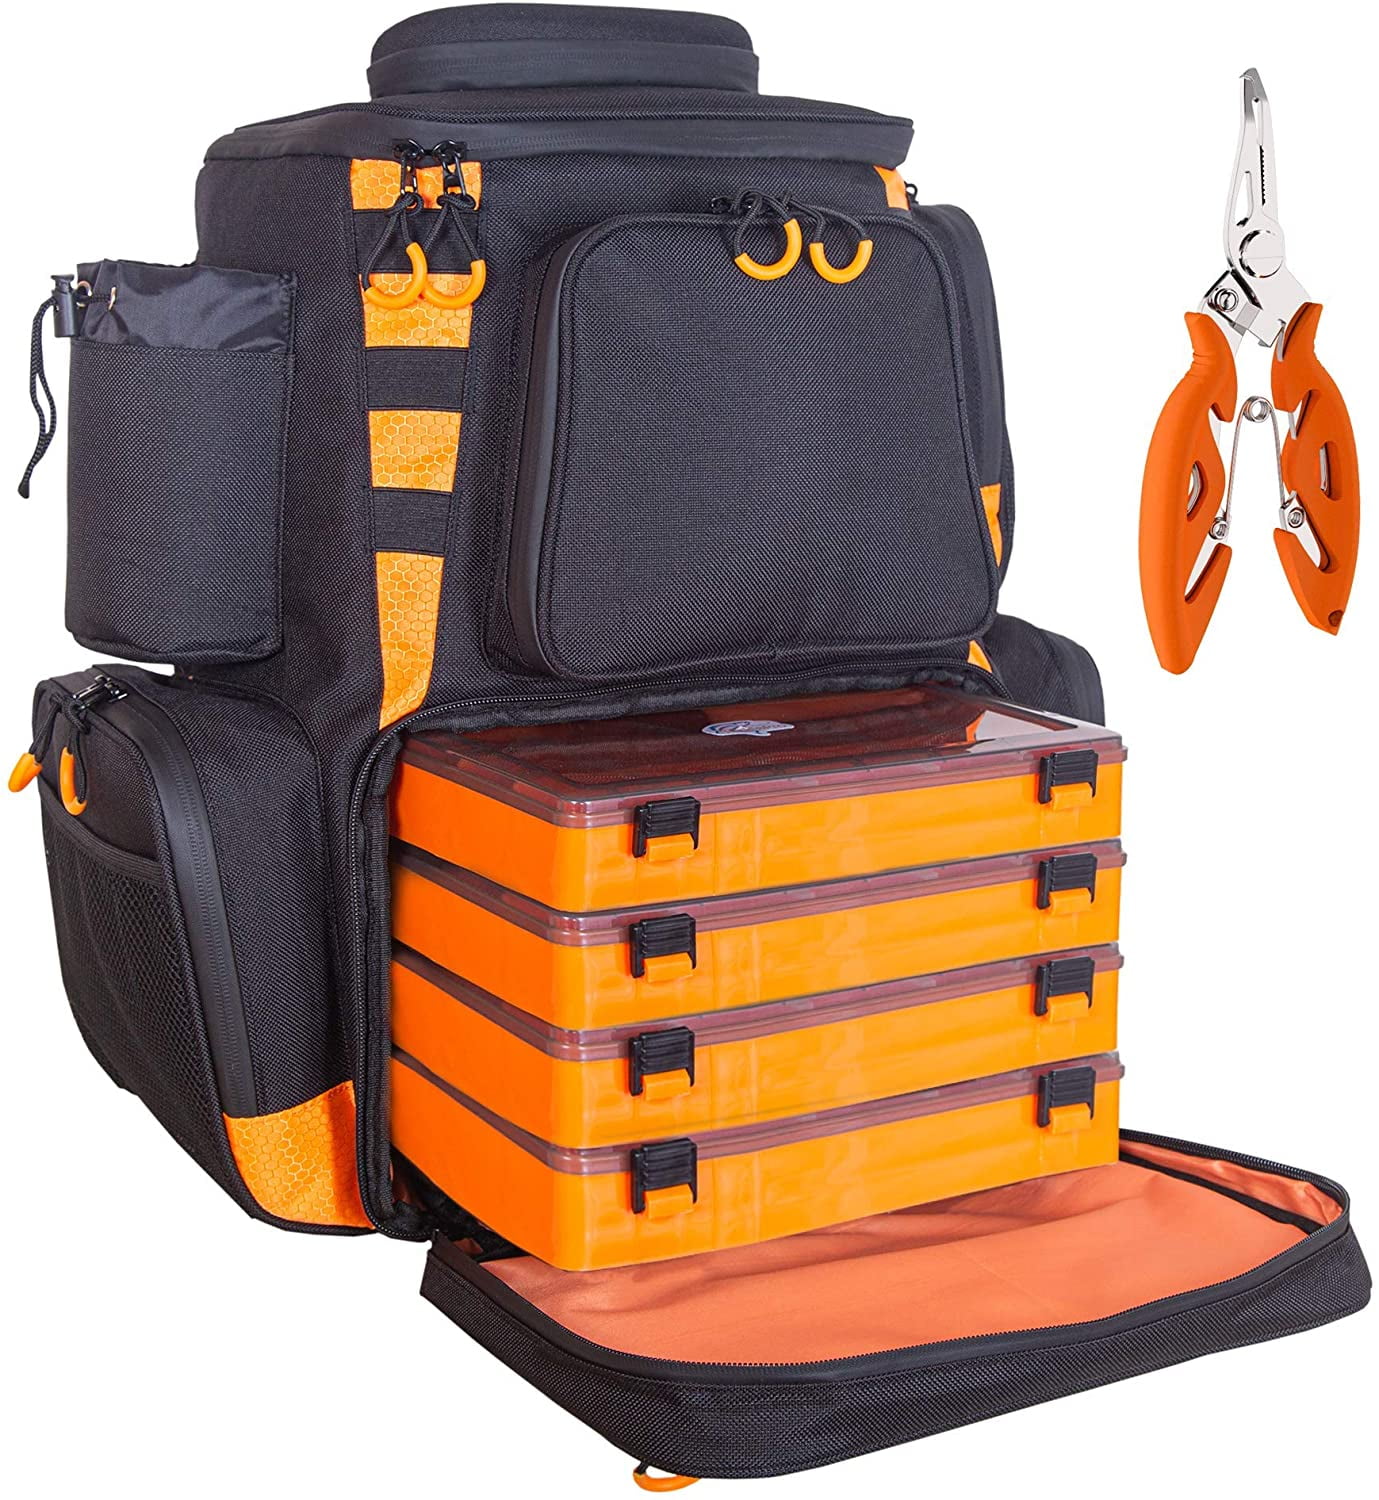 etacklepro Fishing Backpack Waterproof Tackle Bag with Protective Rain  Cover Includes 4 Tackle Boxes Stainless Steel Fishing Pliers and Lanyard -  Black Orange 